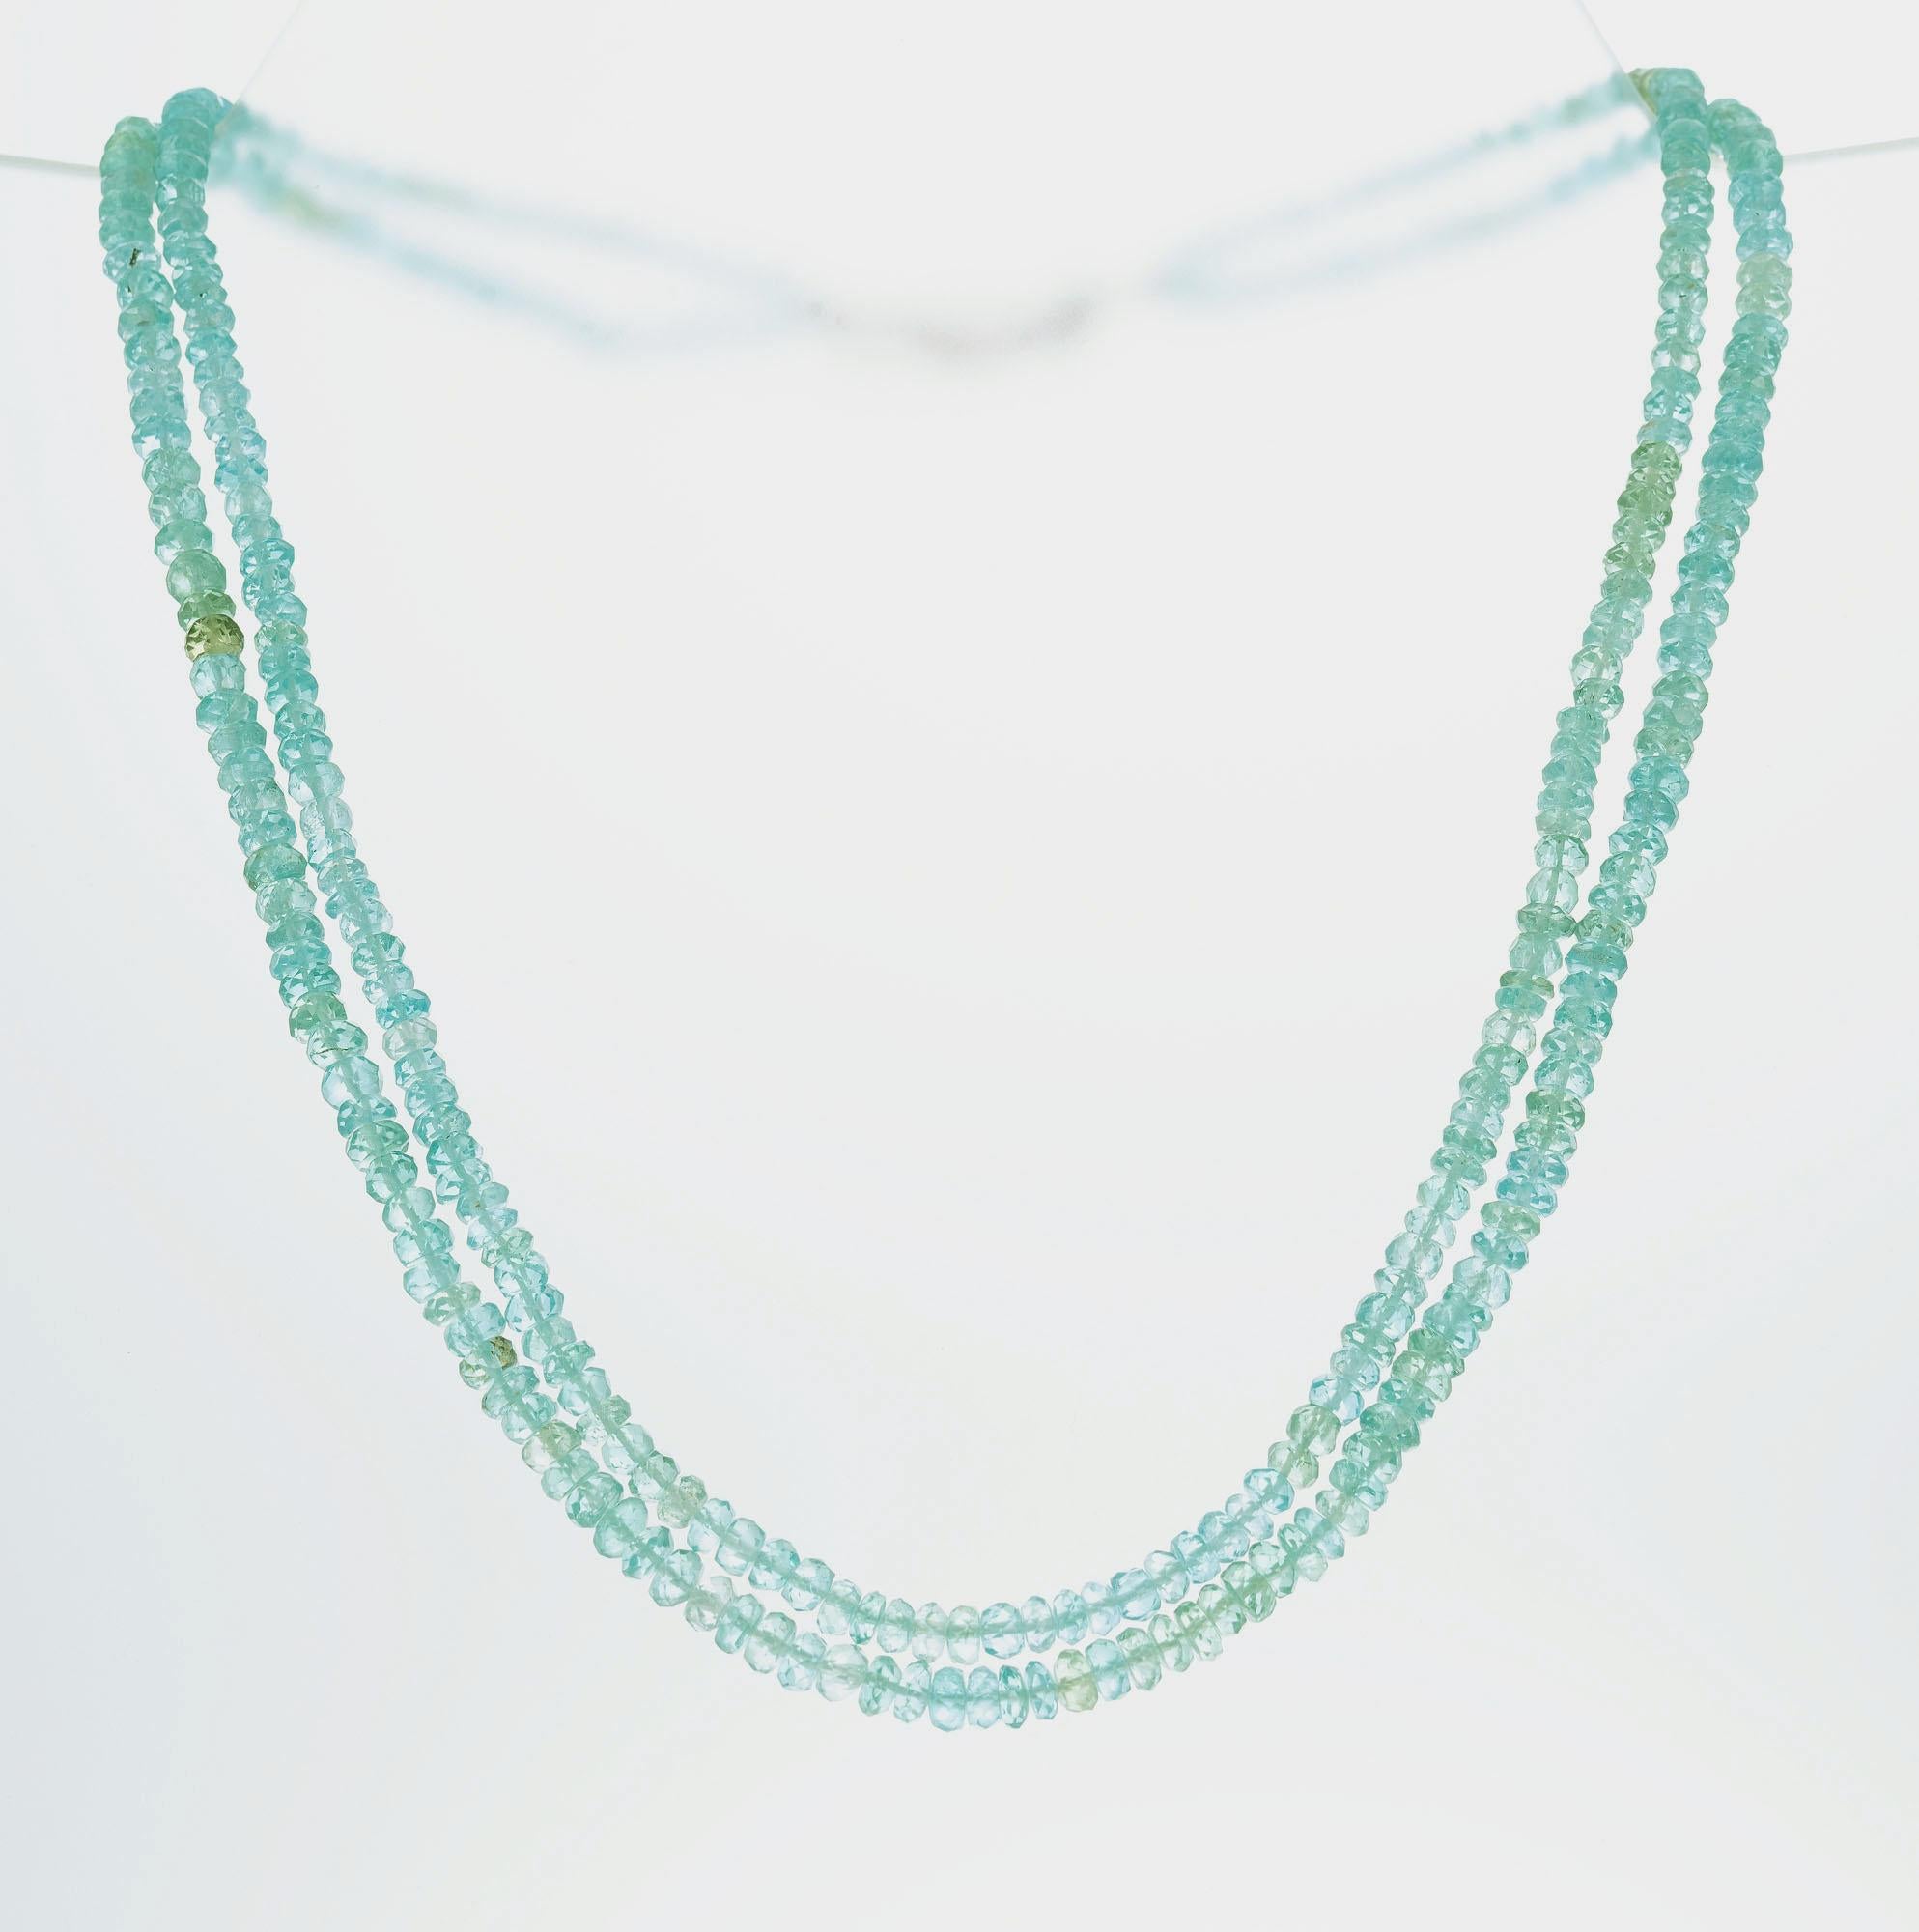 Robin Rotenier Blue green apatite beaded two strand necklace, with 18k yellow gold toggle catch.

Apatite beads 90.00 cts.
Length: 16
24.9 grams
8mm width.
8mm thickness/depth
Hallmark: RR 
